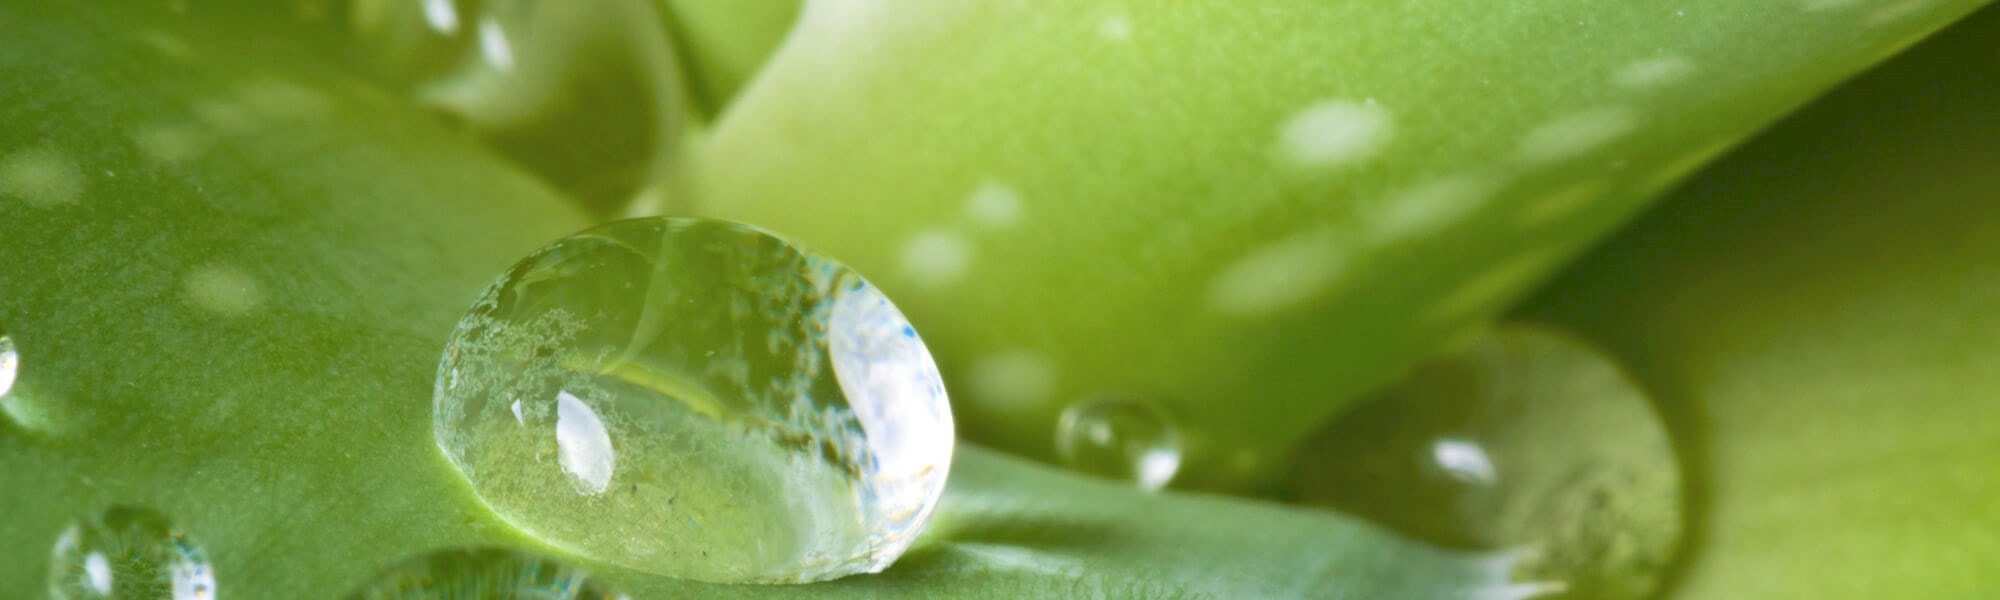 aloe vera for the skin how to use this miracle plant hero